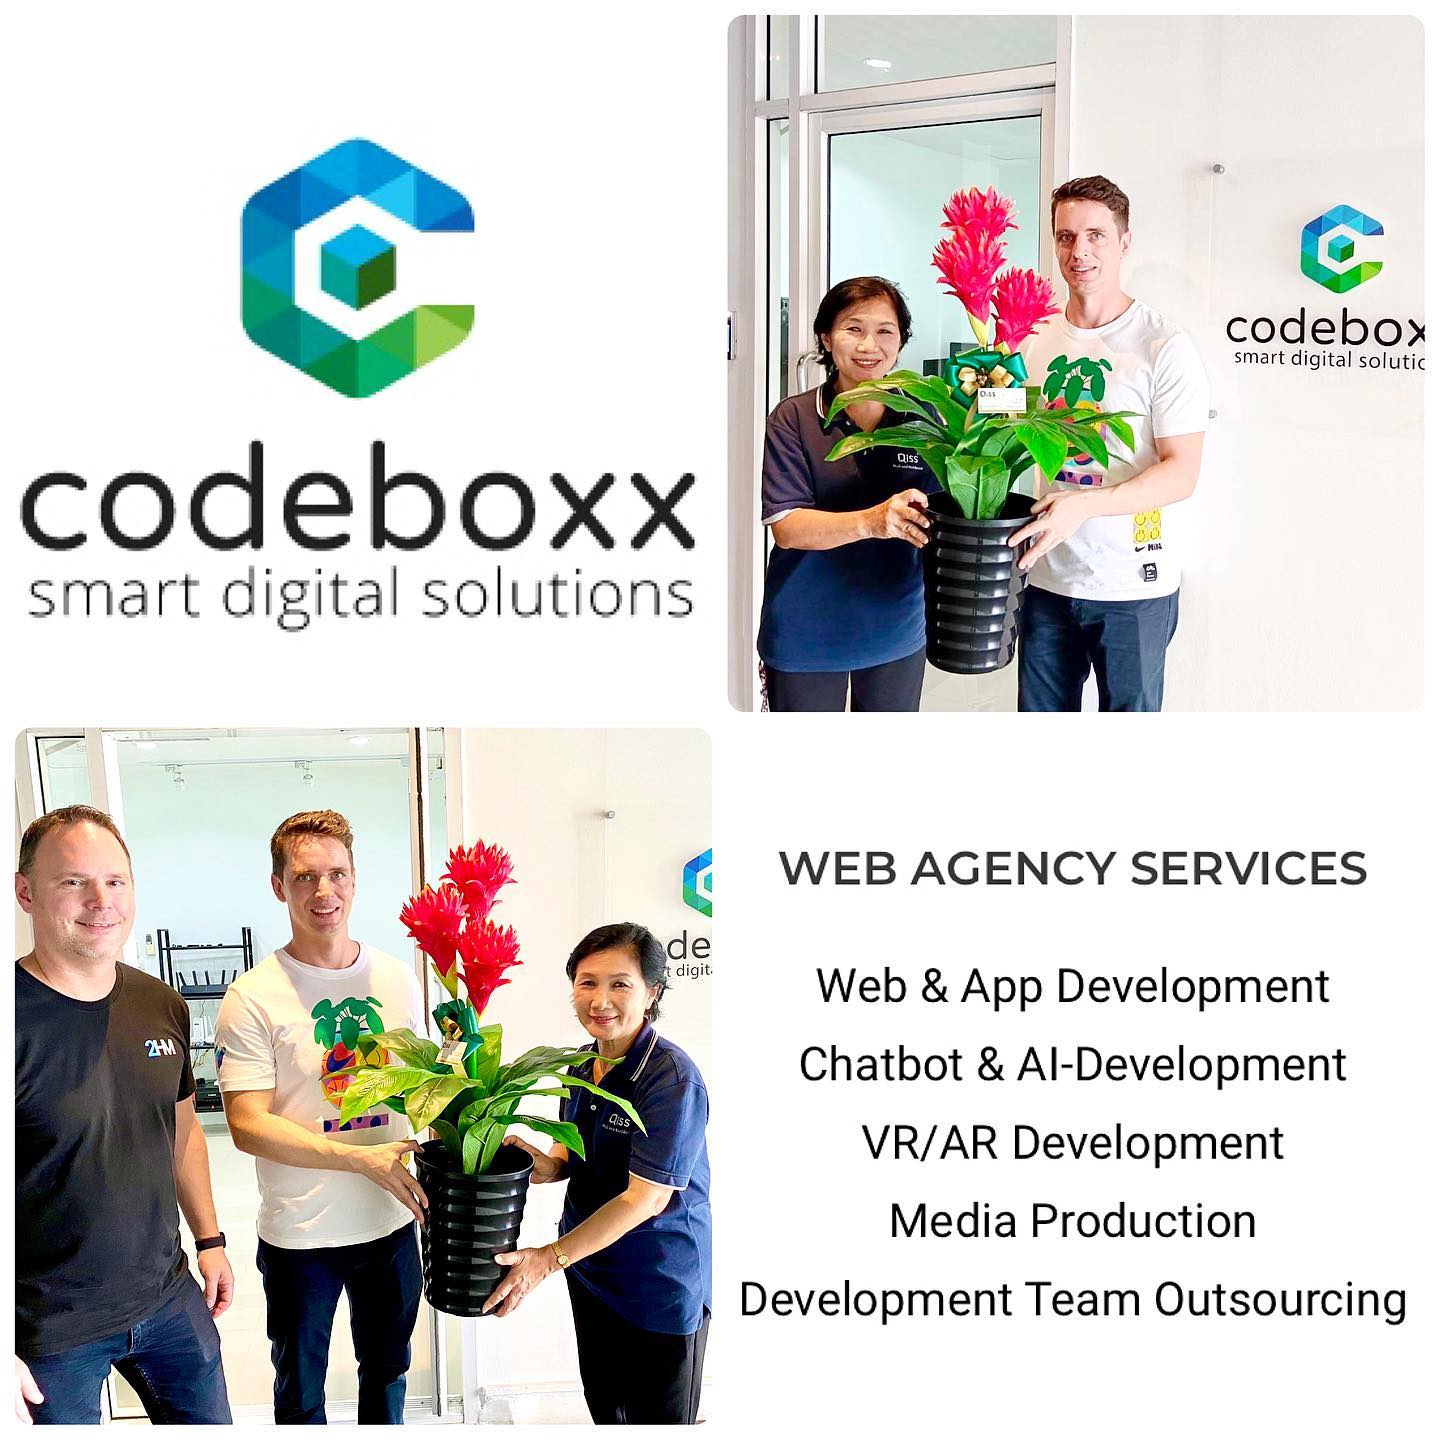 Warm Welcome to Codeboxx!